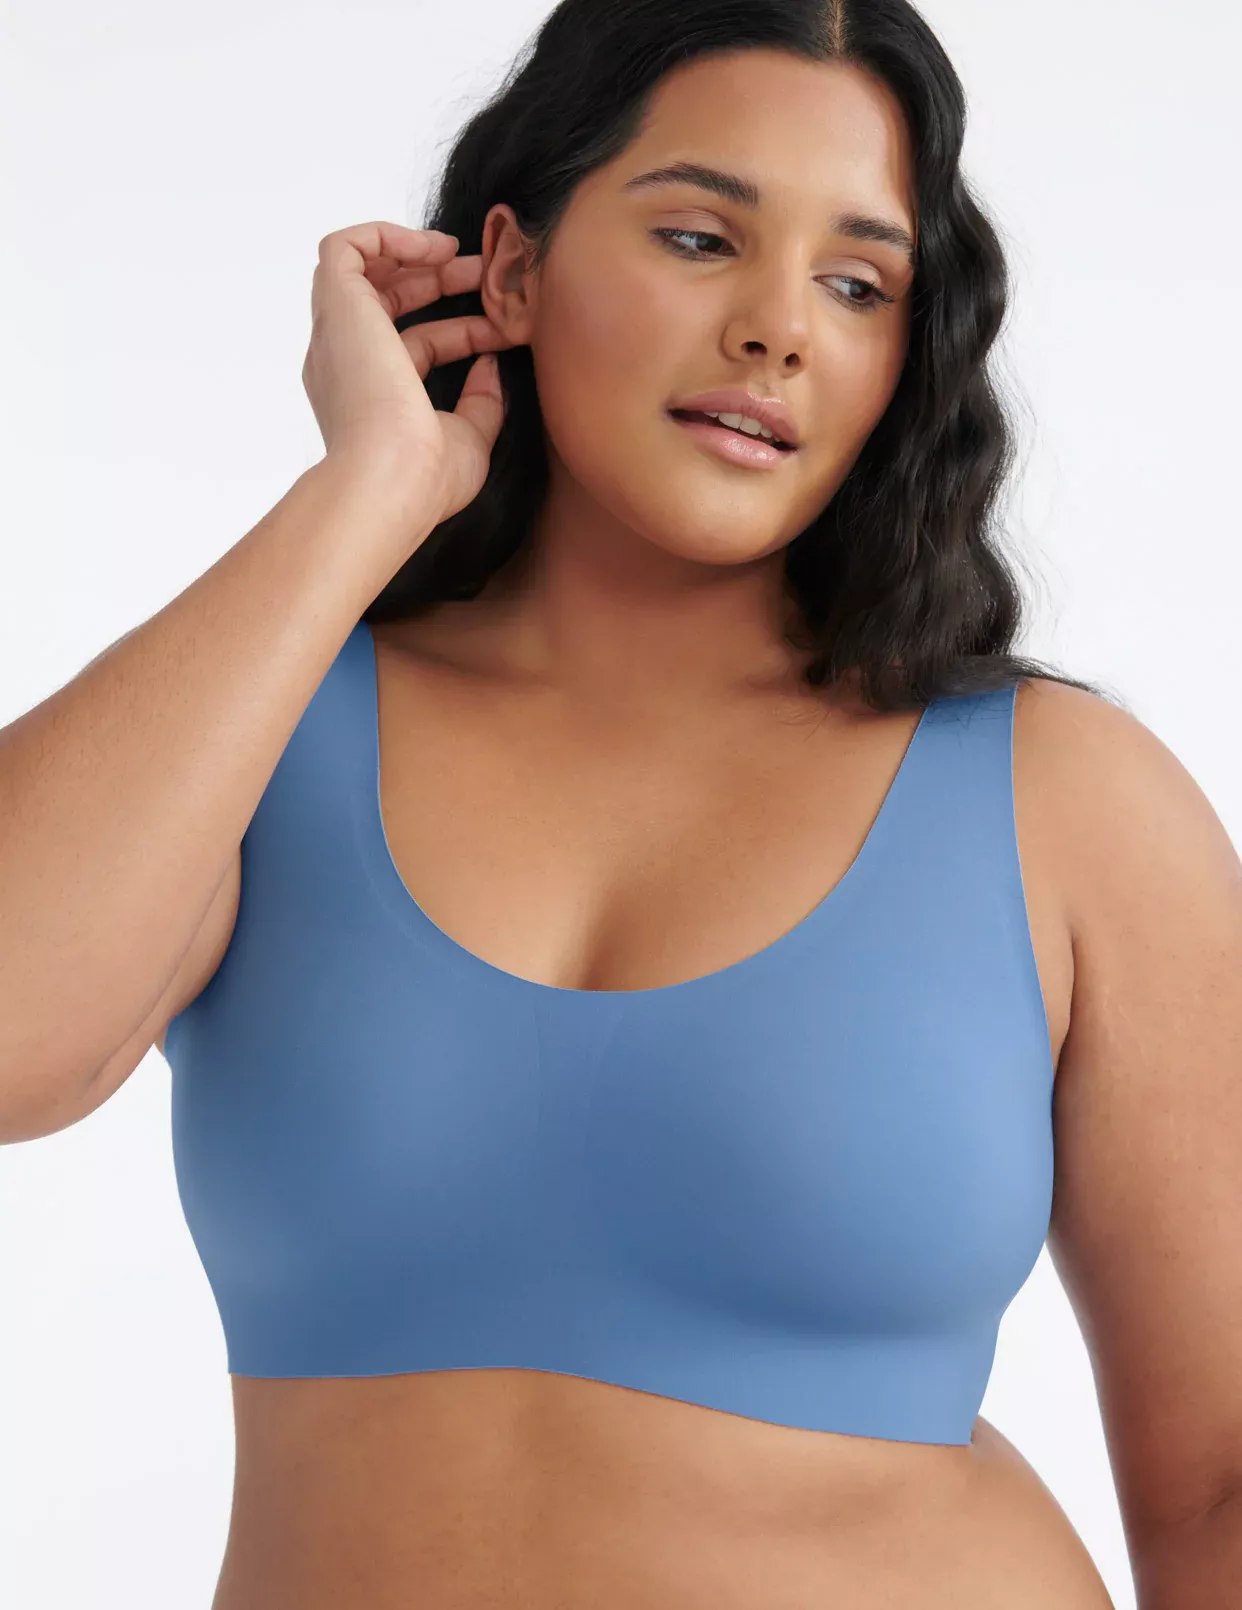 This KNIX Luxelift Pullover Bra